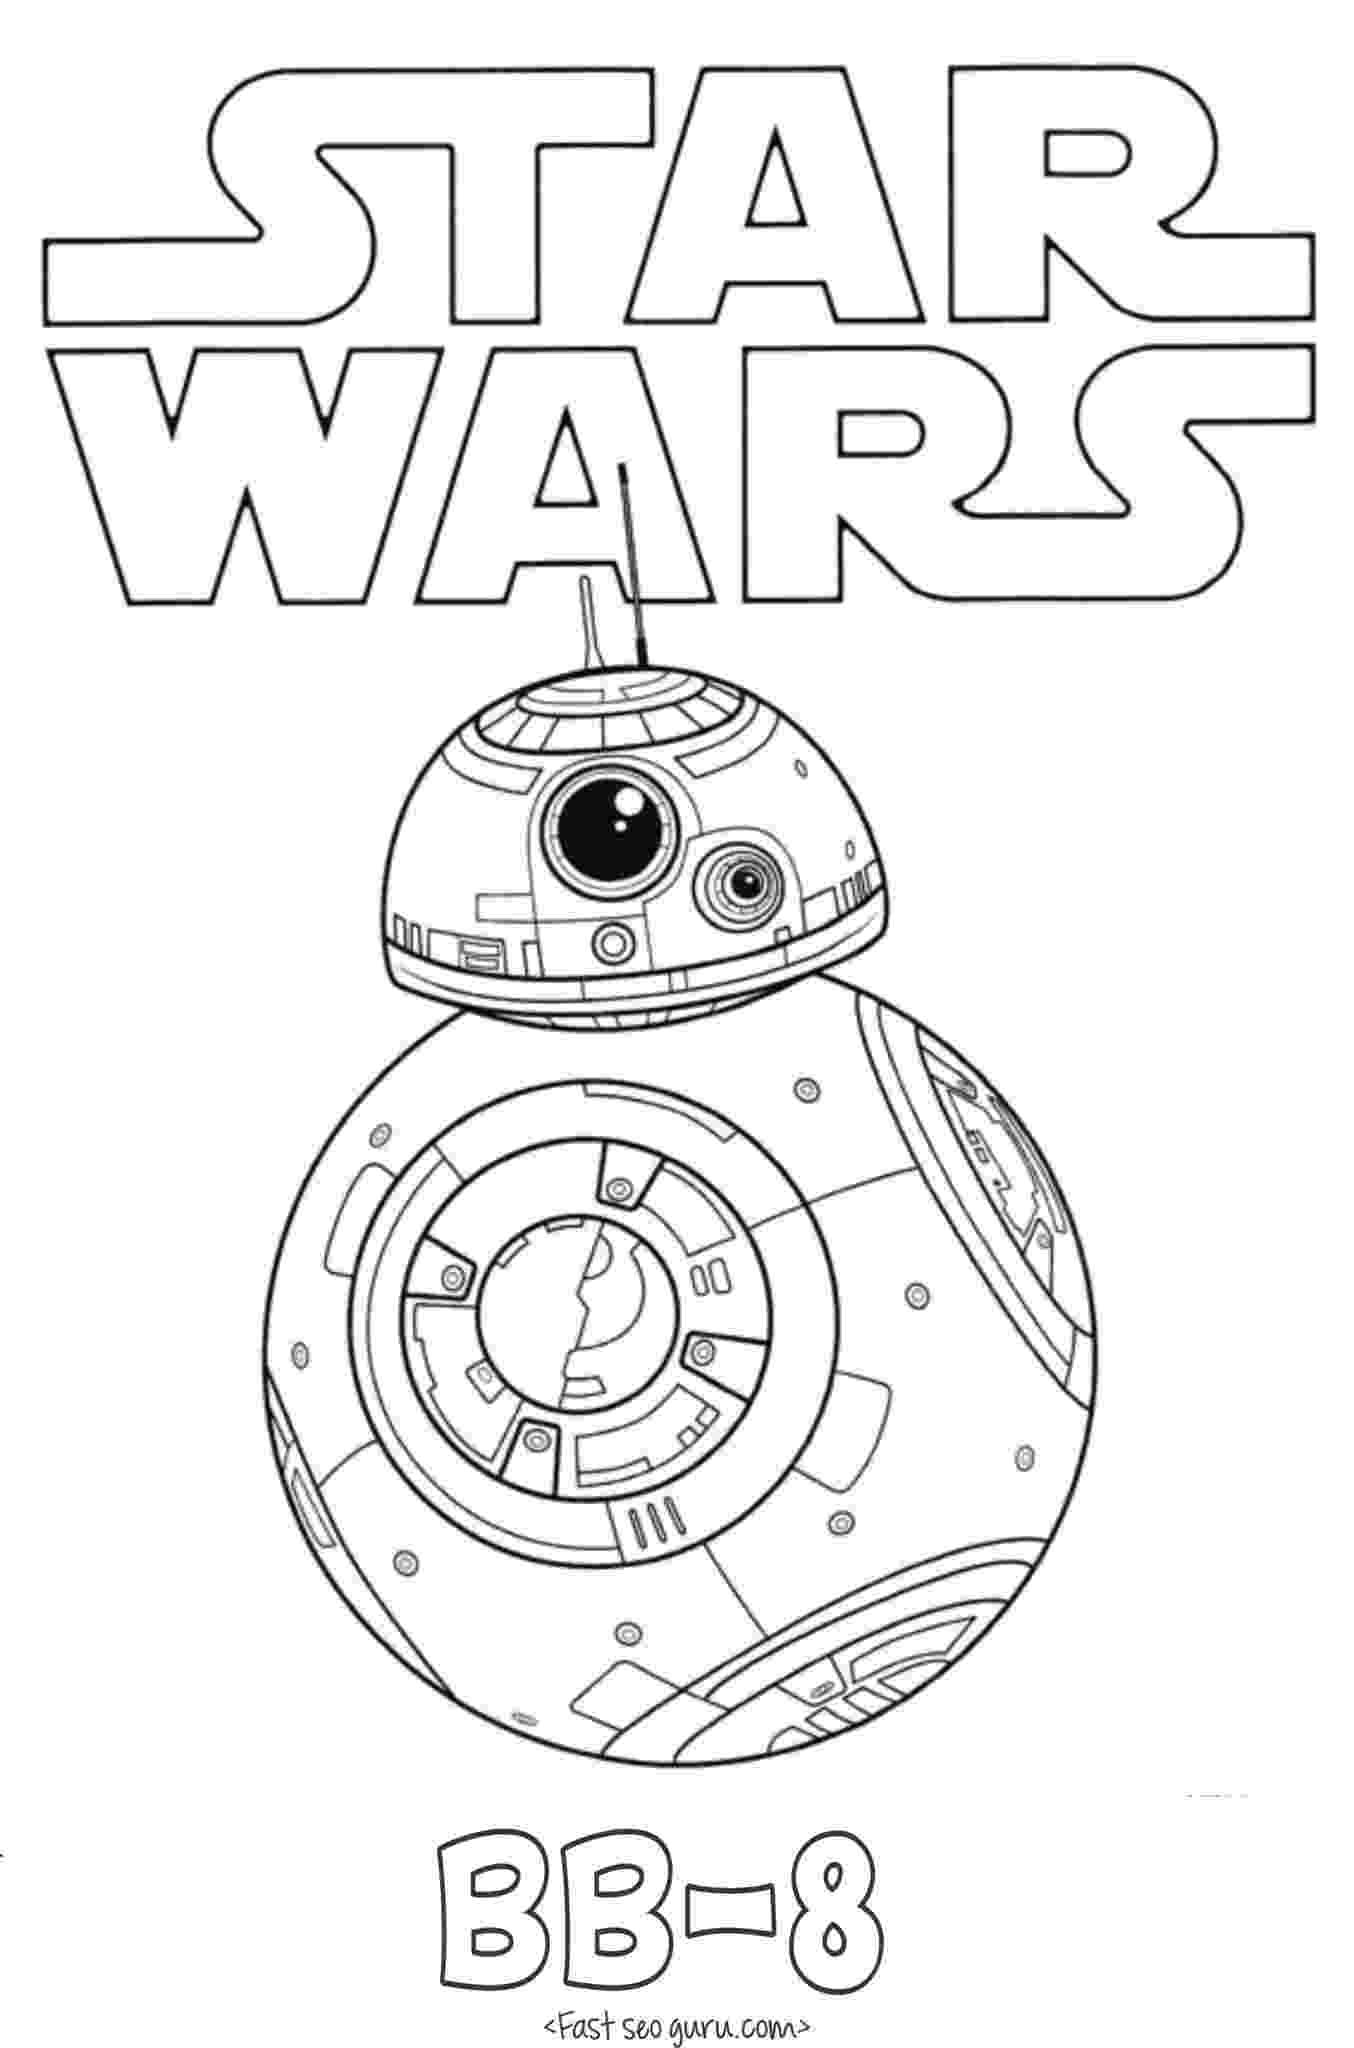 star wars coloring pages to print lego star wars clone wars coloring page free printable print coloring to wars star pages 